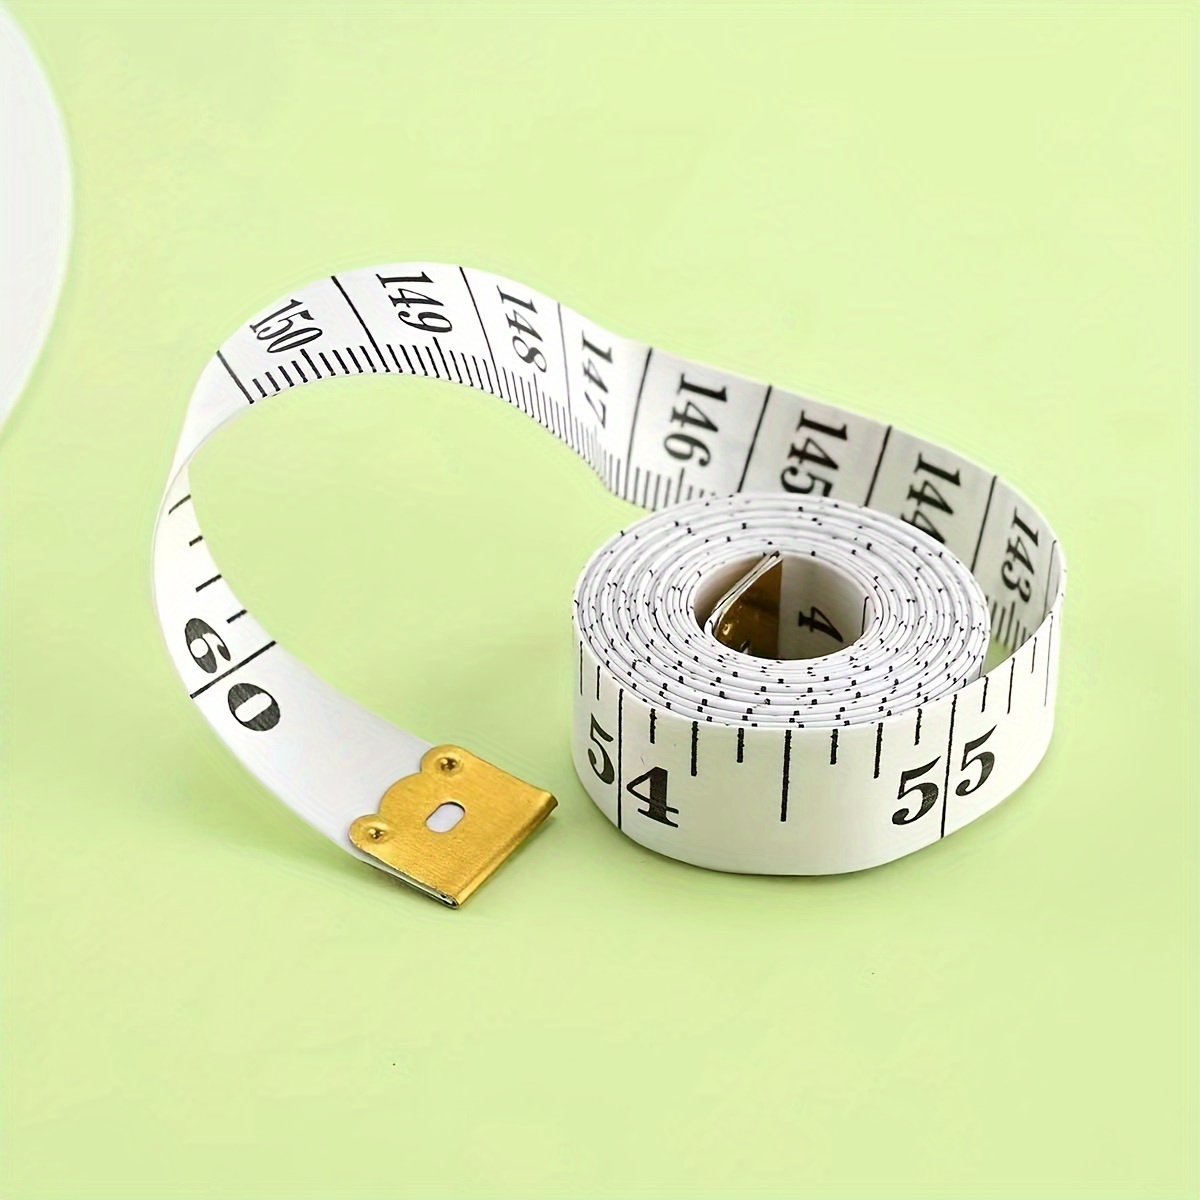 

White Soft Tape Measure Ruler 59 Inches For Sewing Tailor Cloth Fabric Body Measuring - 1pc